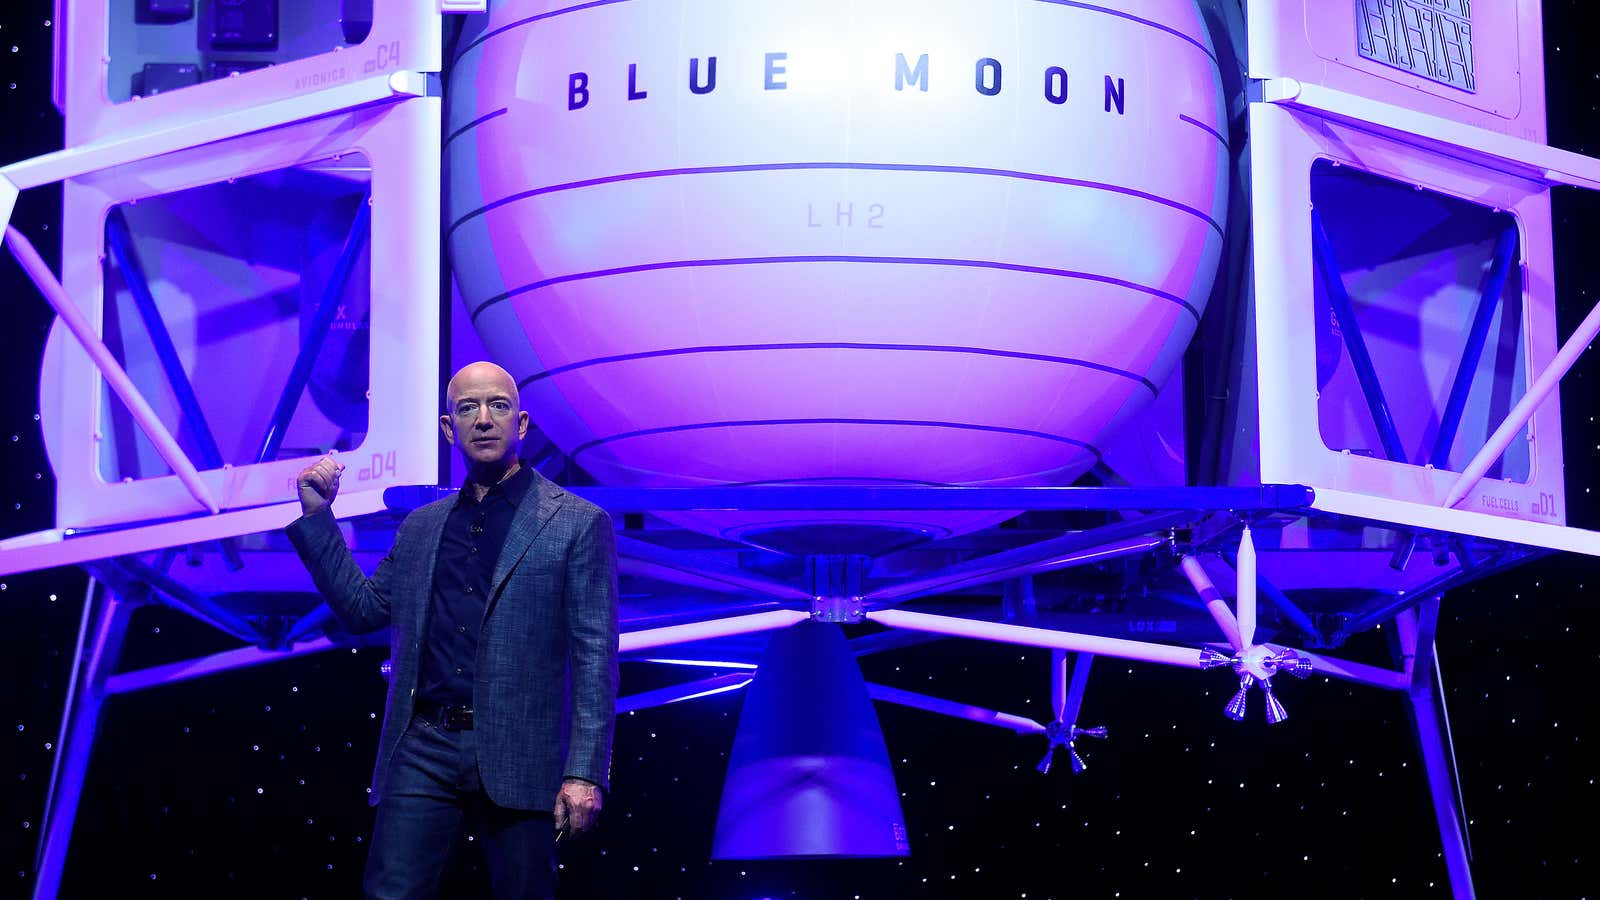 Amazon founder Jeff Bezos unveils a moon lander in May 2019.